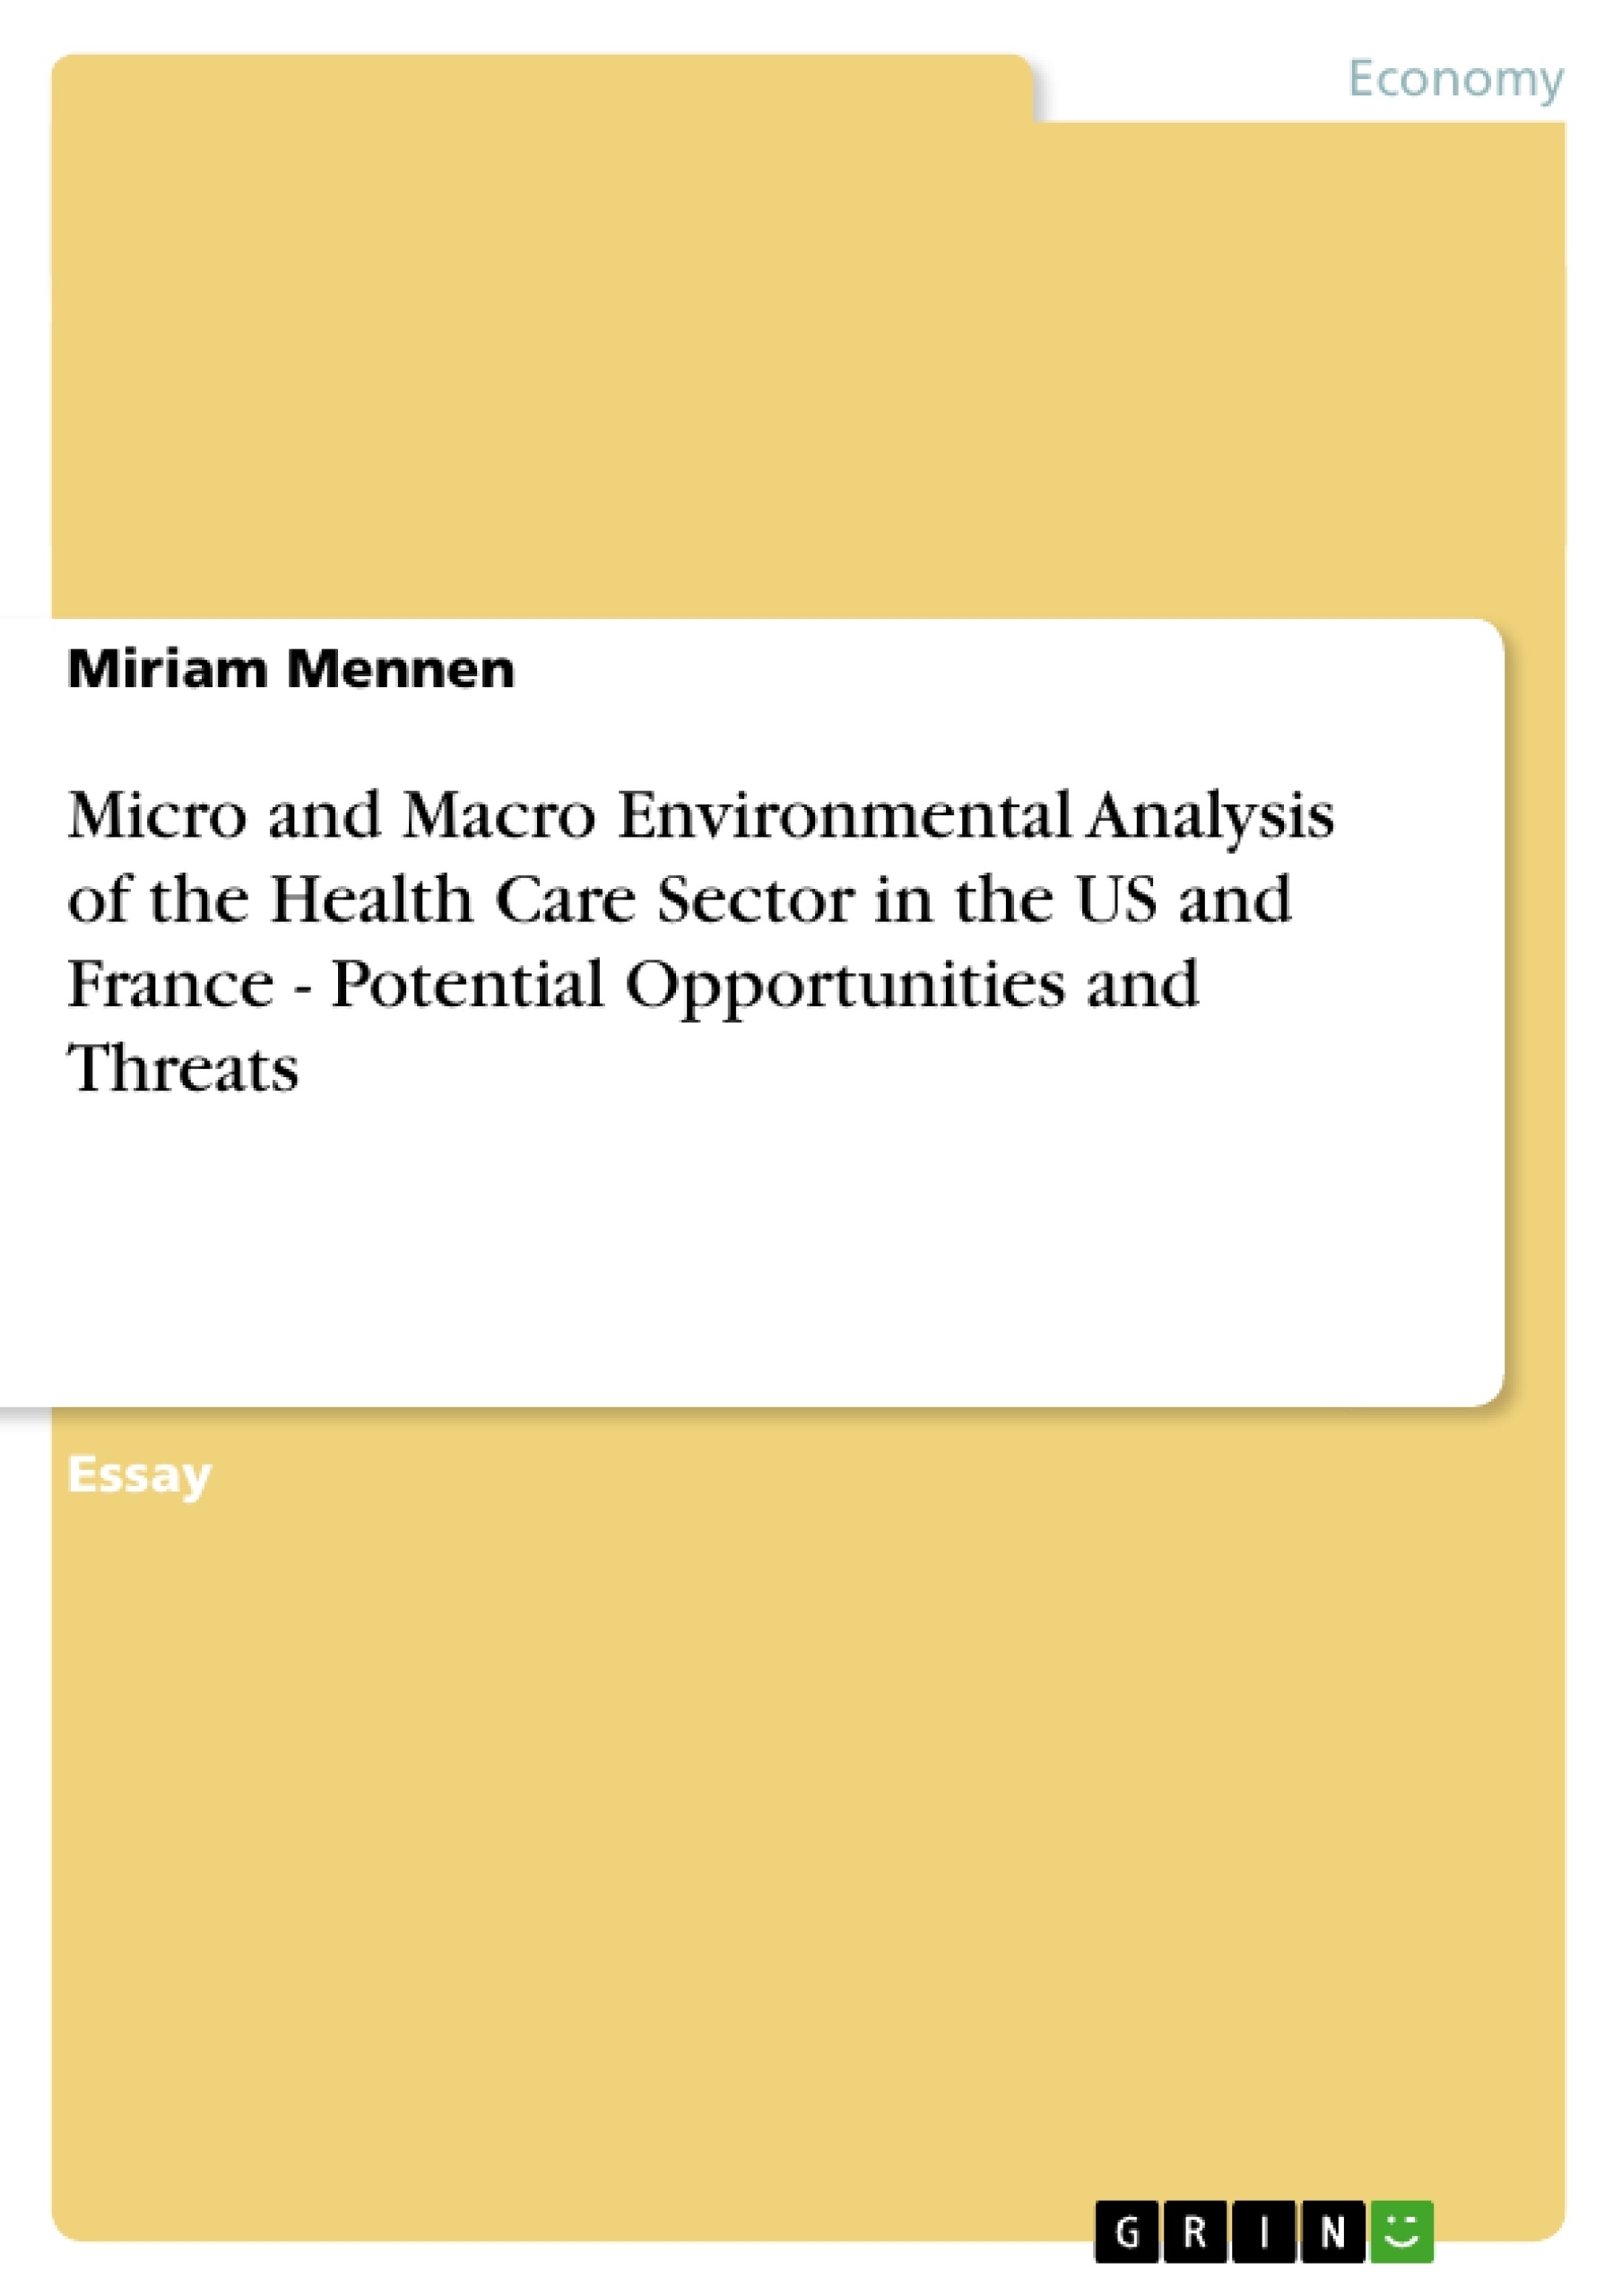 Title: Micro and Macro Environmental Analysis of the Health Care Sector in the US and France  - Potential Opportunities and Threats 